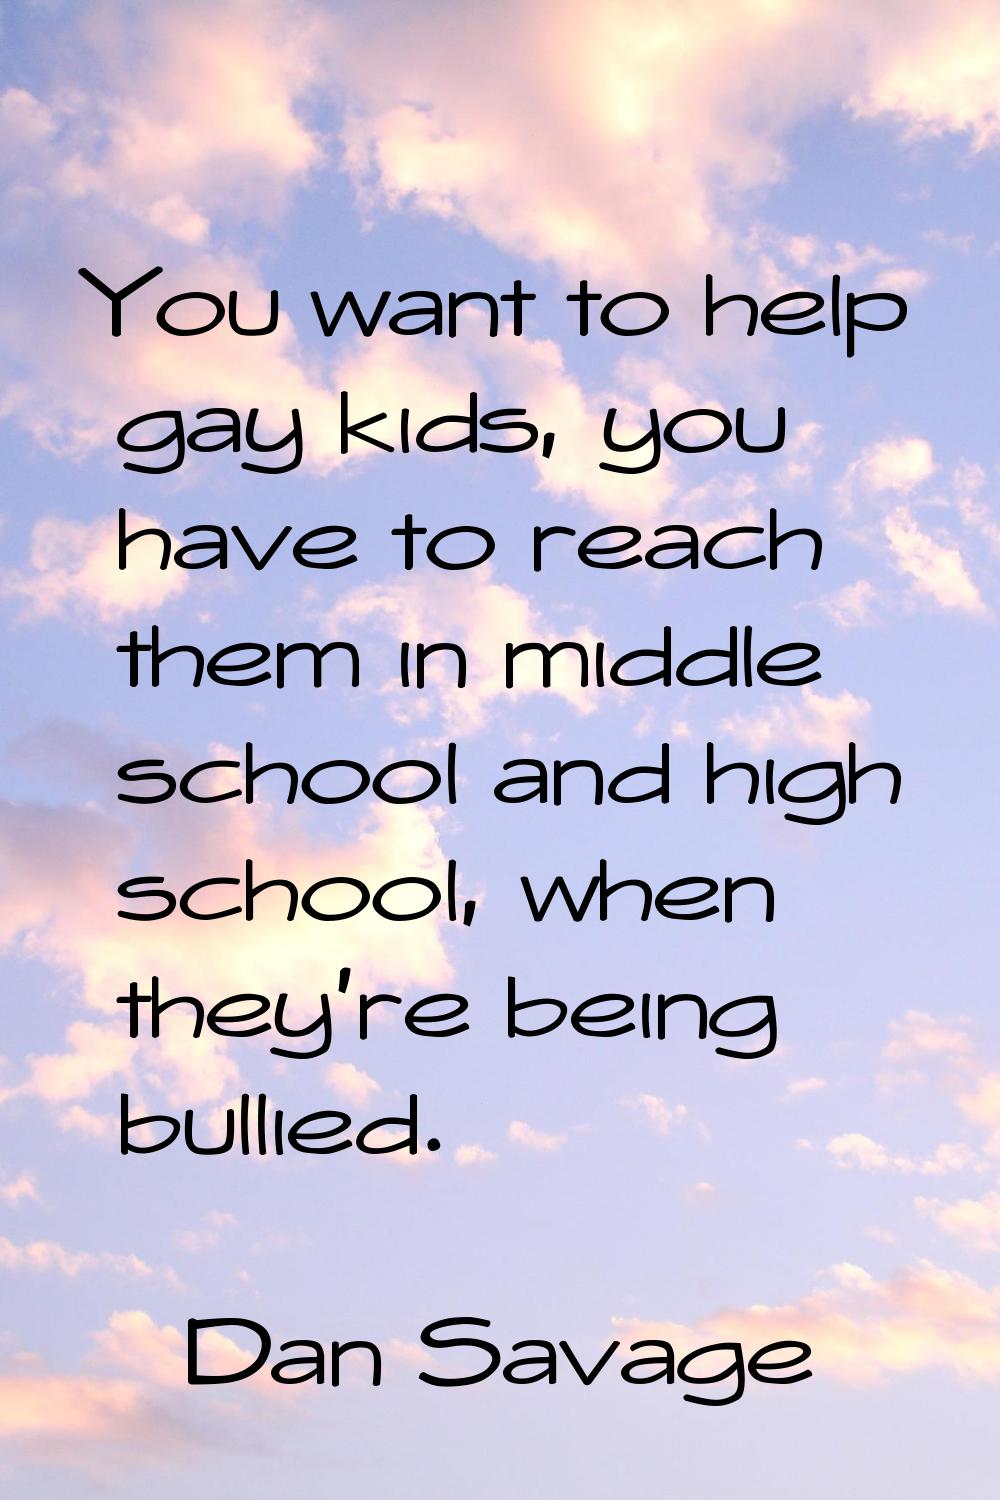 You want to help gay kids, you have to reach them in middle school and high school, when they're be